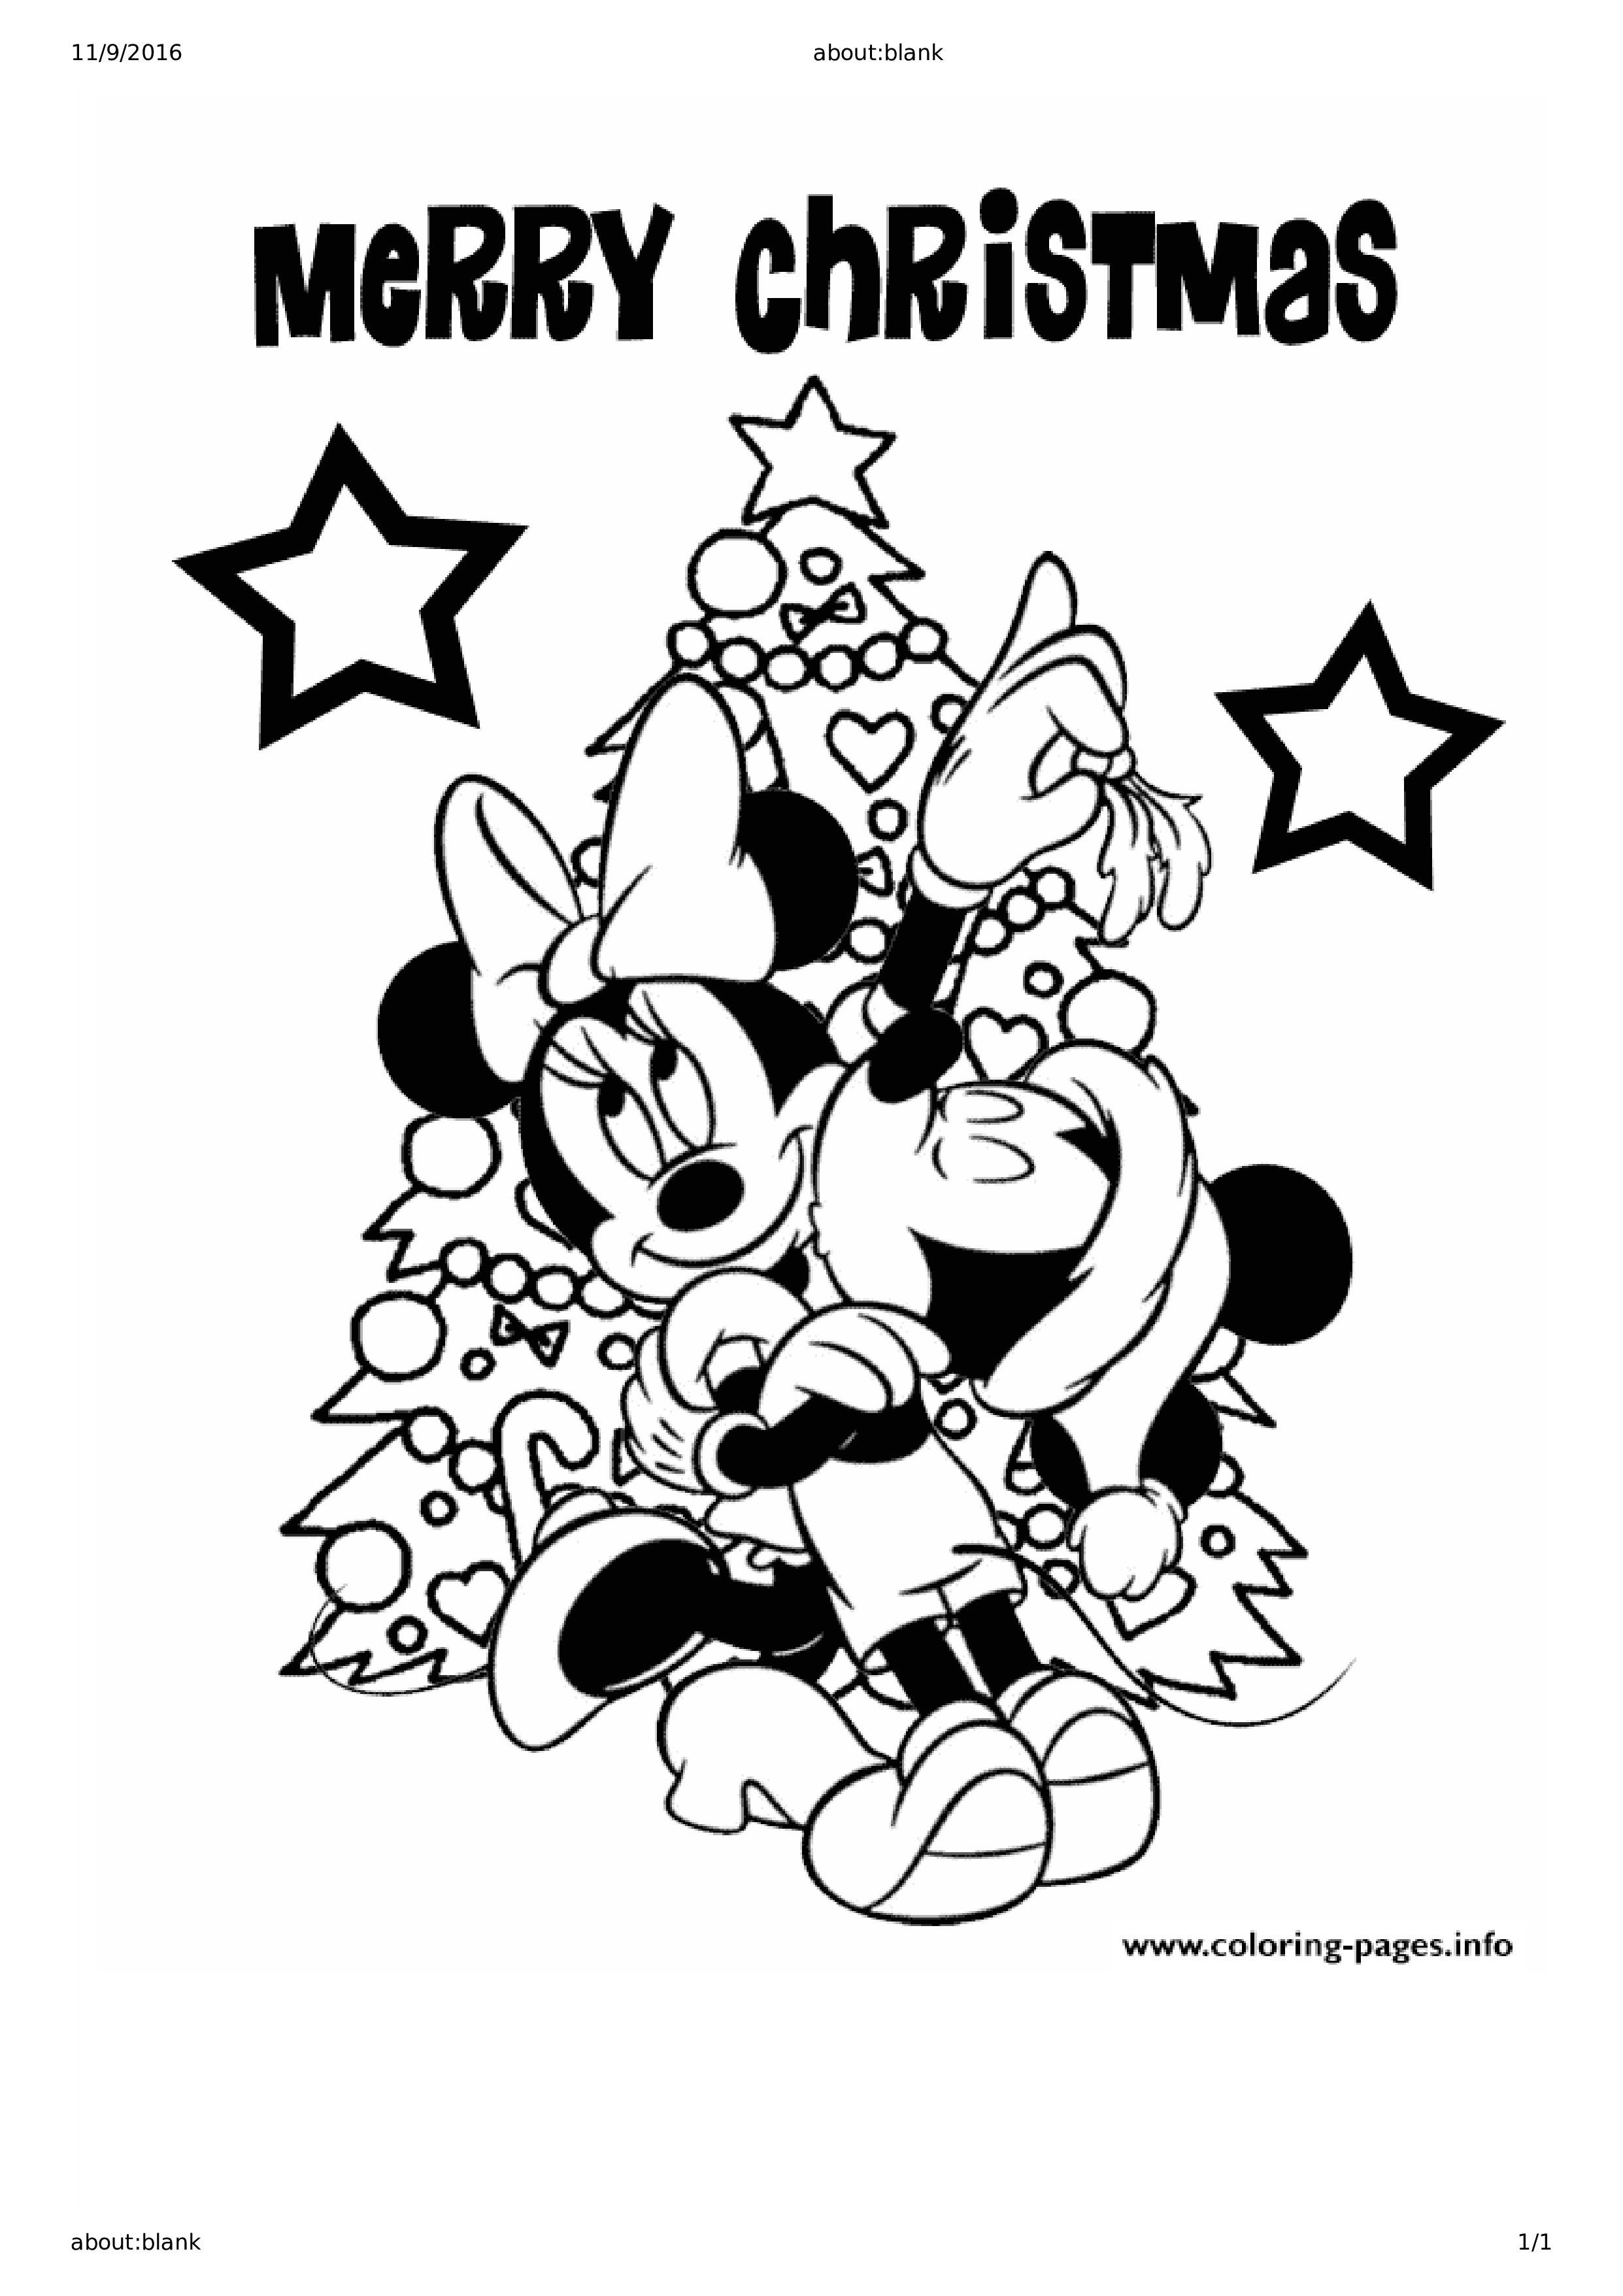 colouring templates disney 20 princess coloring pages vector eps jpg free templates disney colouring 